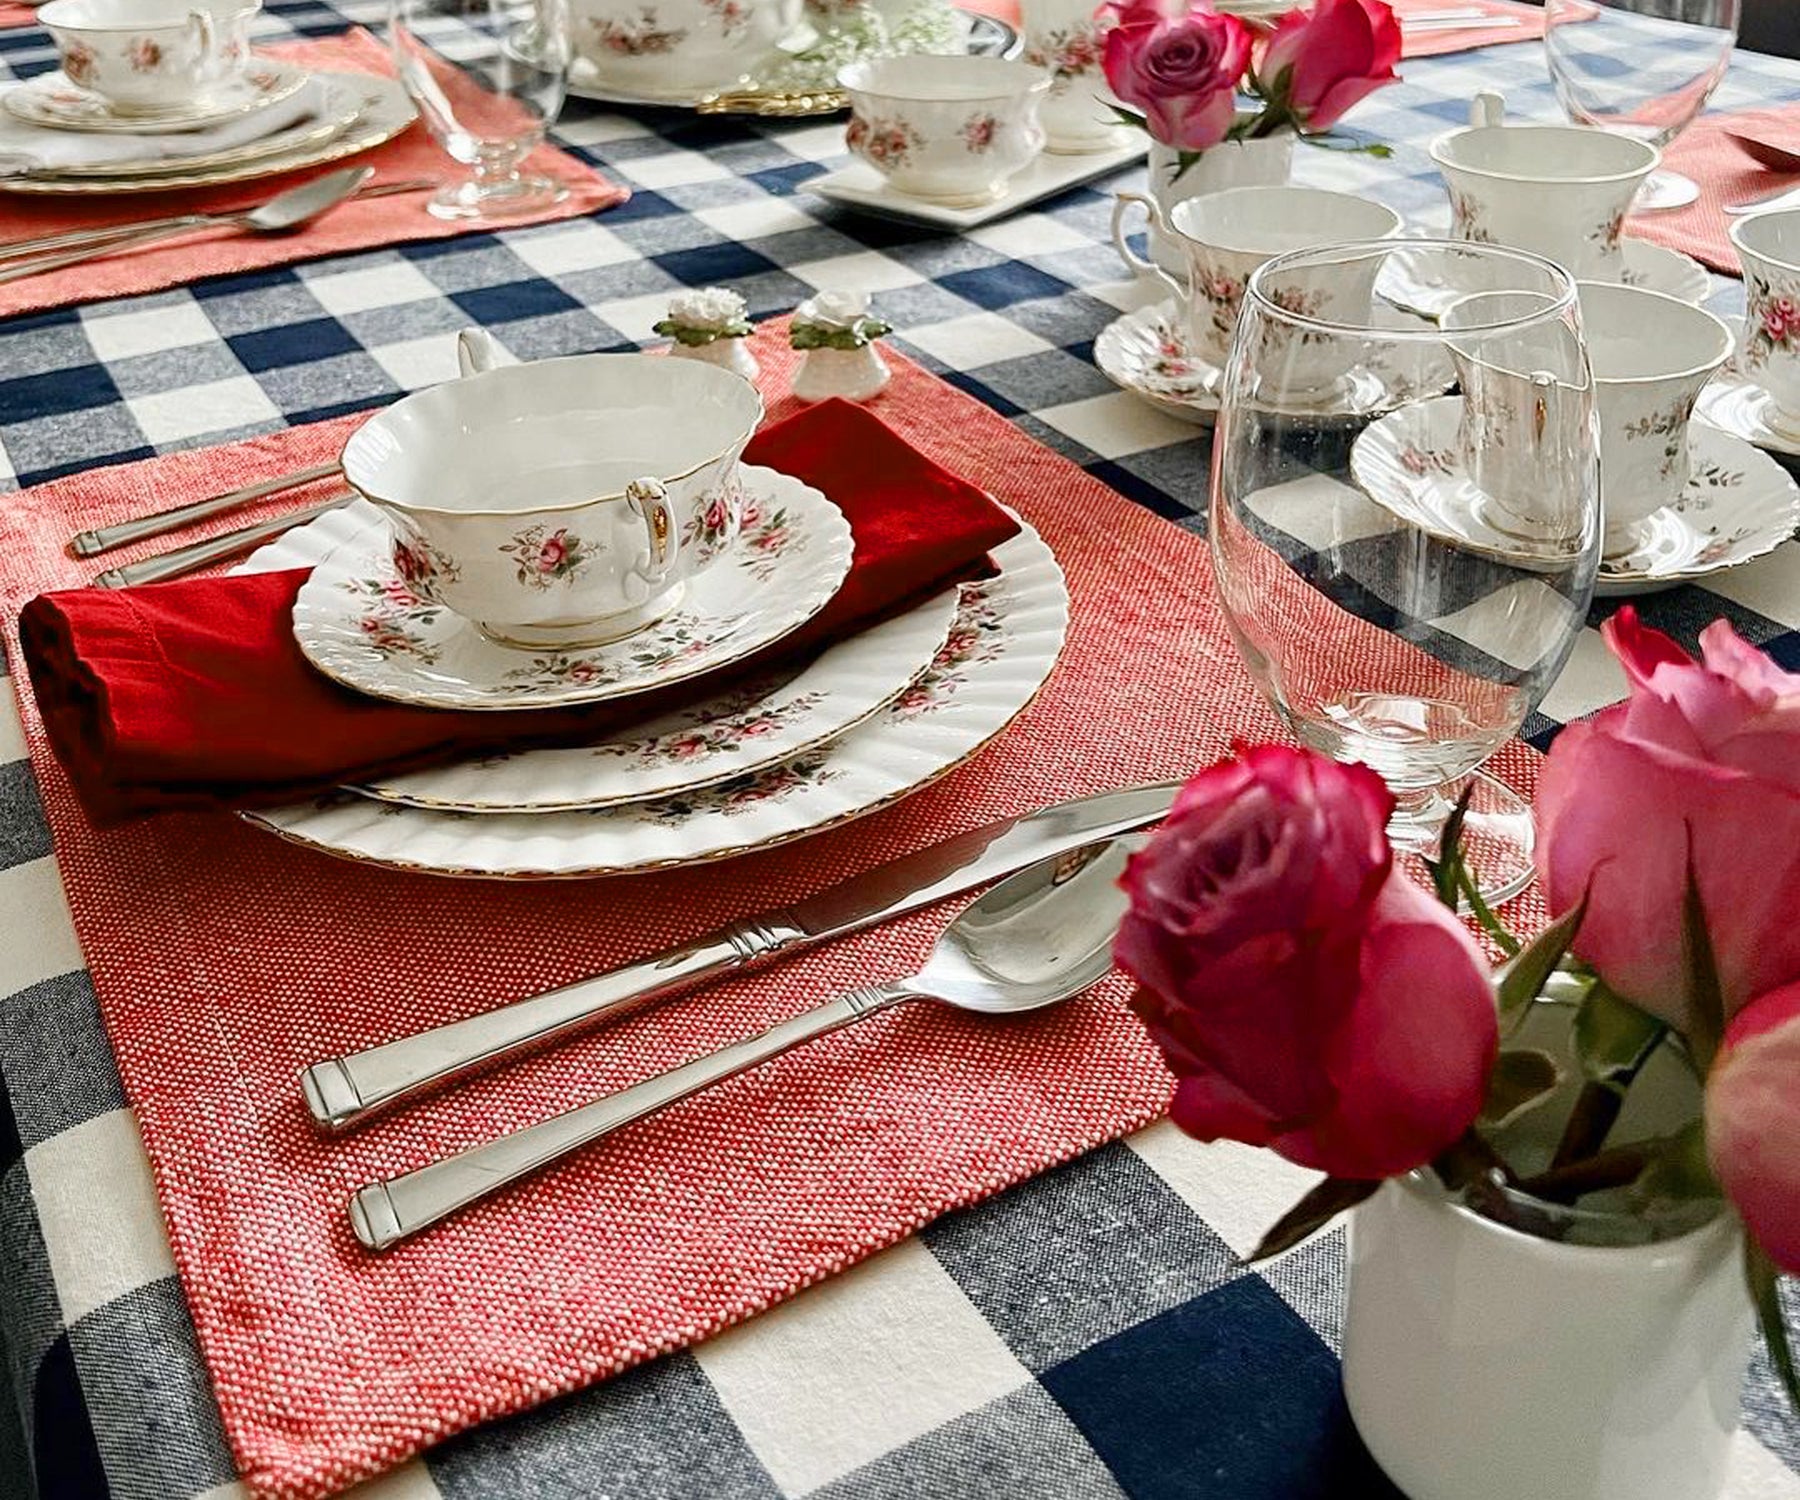 Enhance your dining table with vibrant red fabric placemats, combining elegance and protection for a delightful mealtime ambiance.